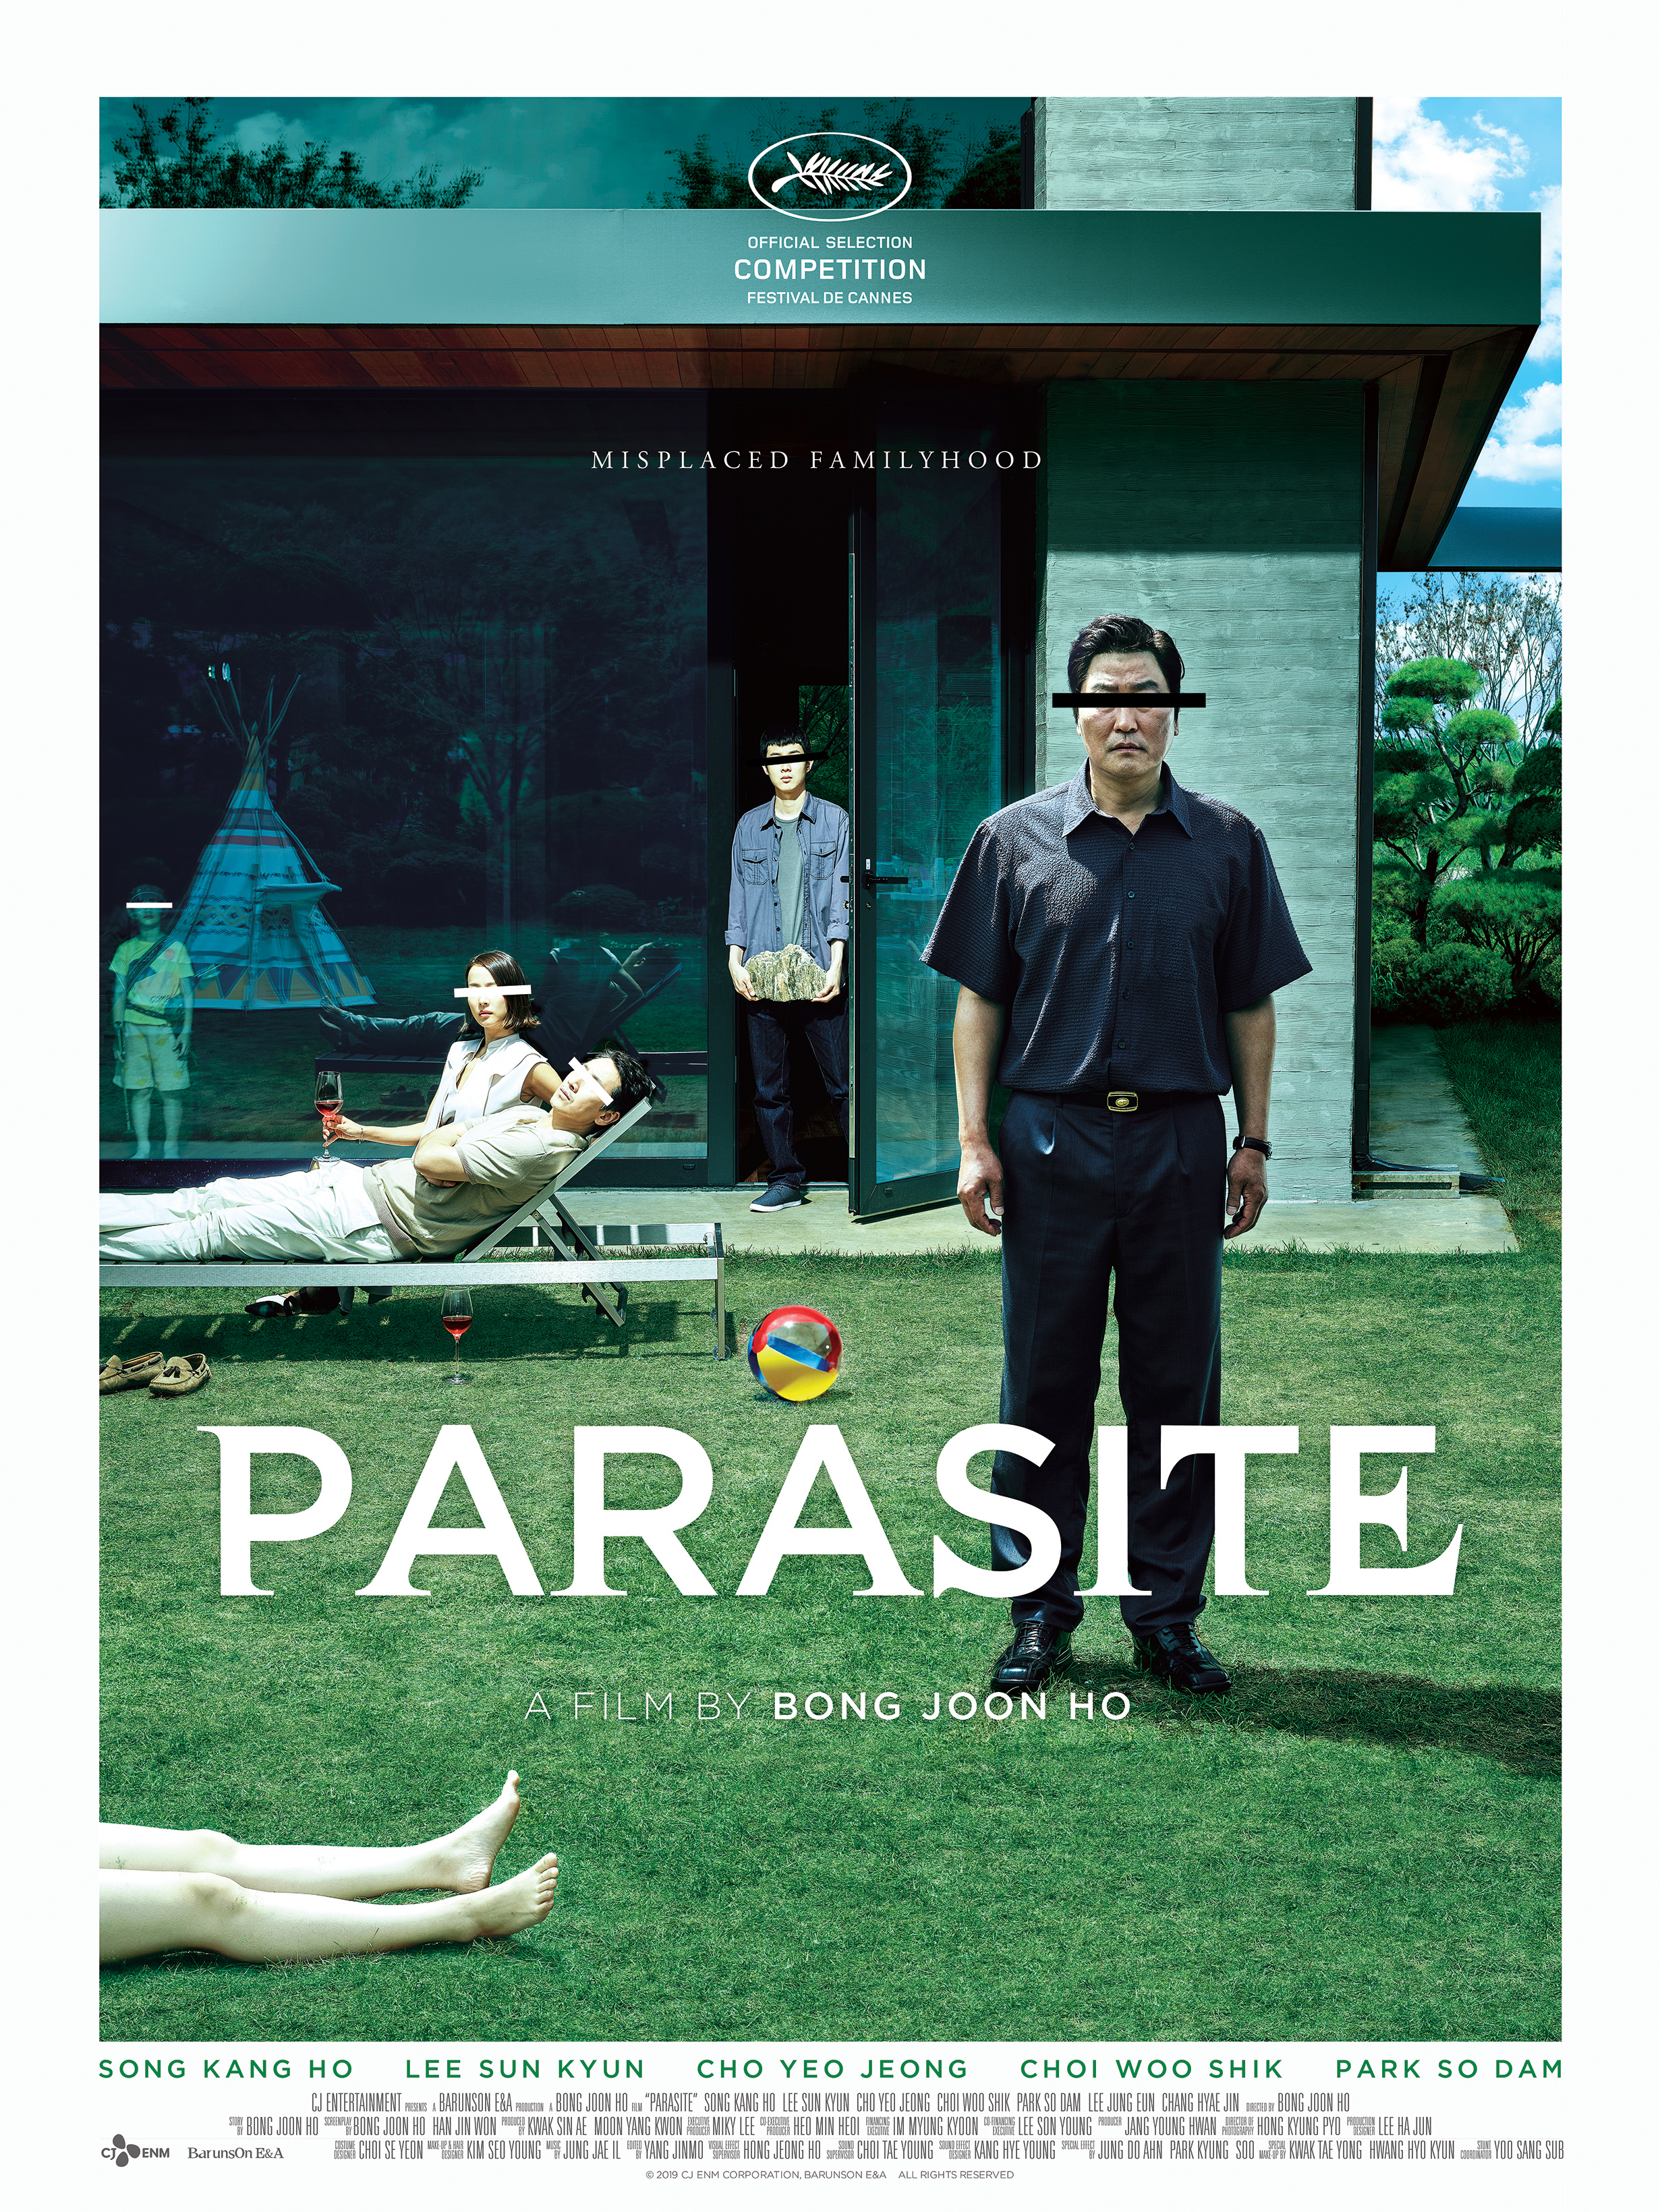 Promotional poster for film "Parasite"